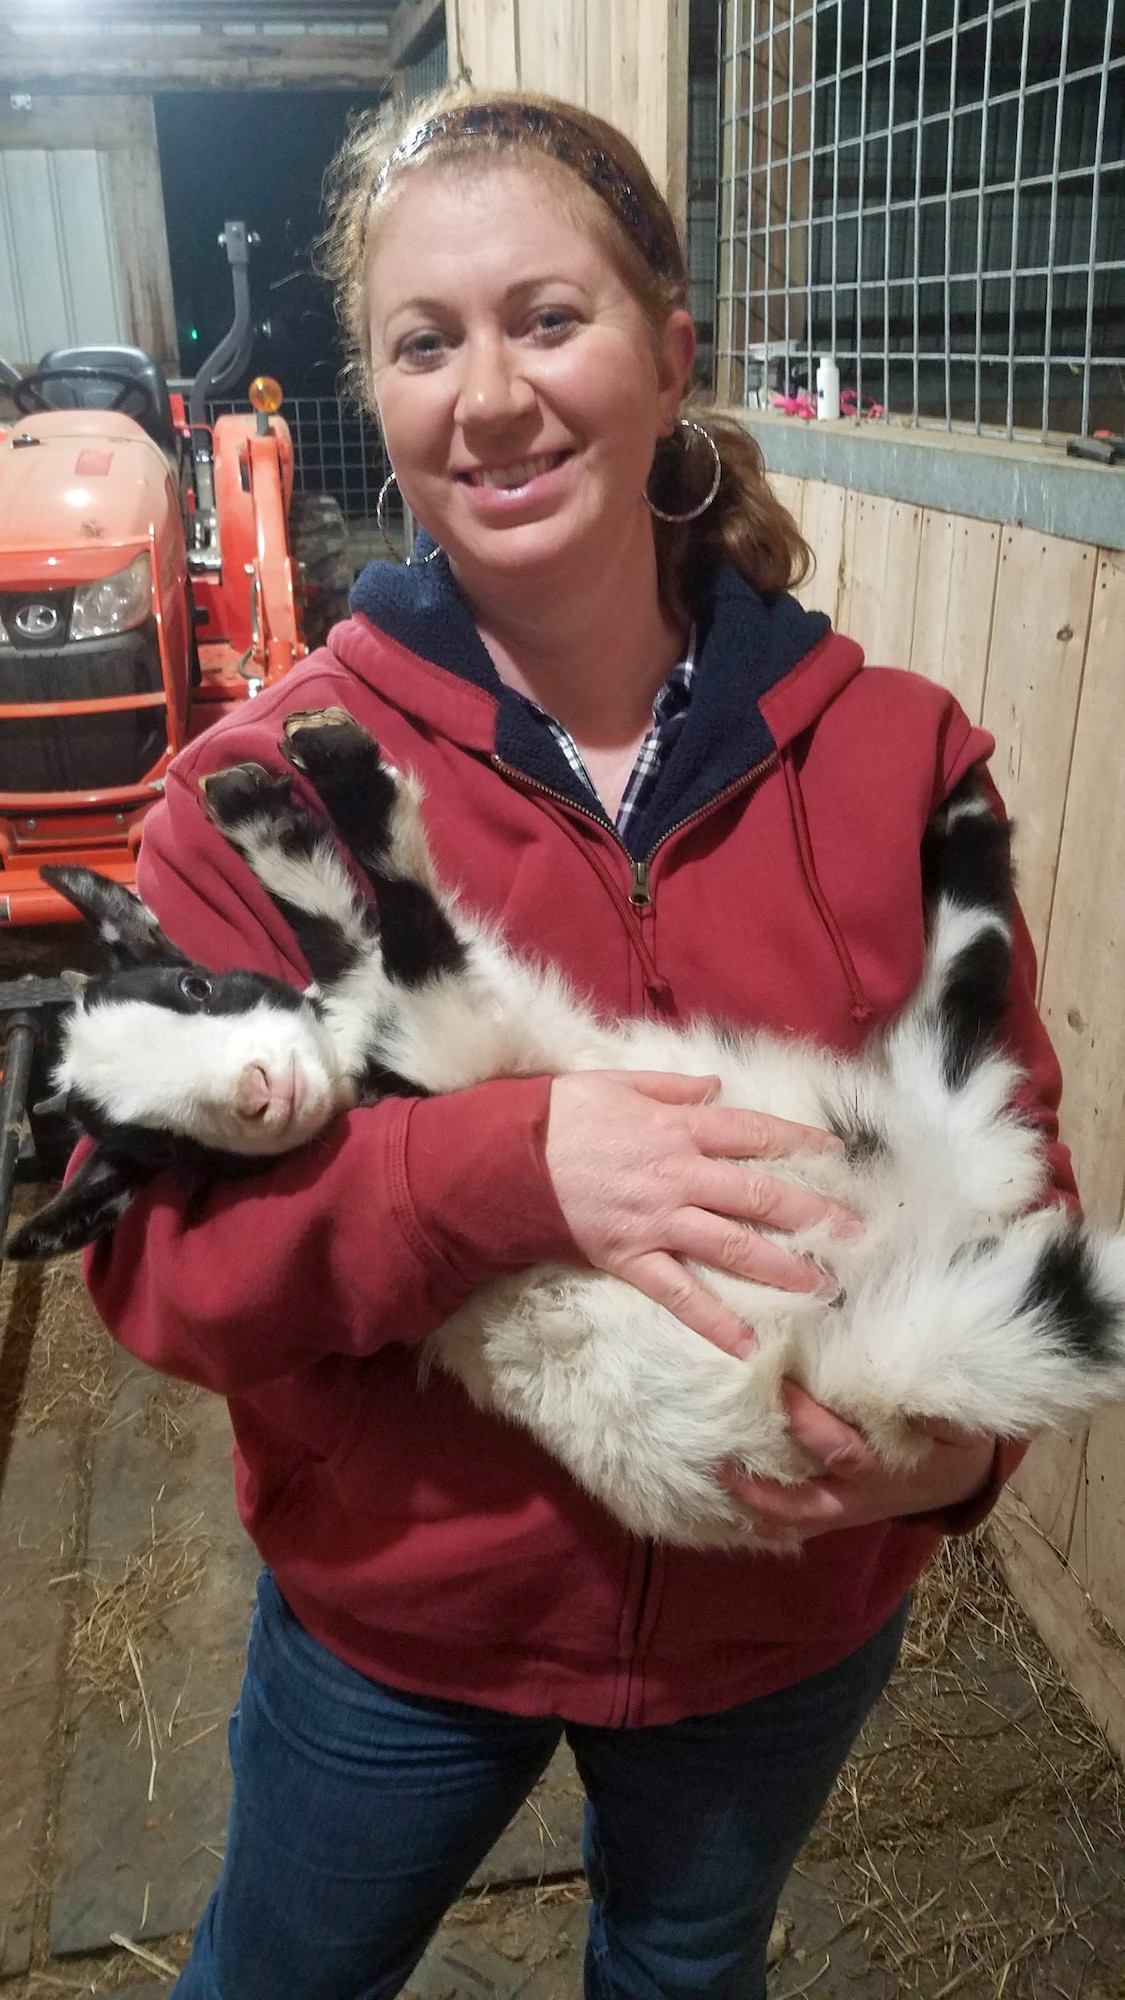 Marcy Releford, an administrative assistant for the Base Operations and Support Branch at Arnold Air Force Base, holds one of the 20 Nigerian dwarf goats she cares for on her 7.5-acre farm in Morrison, Tenn. In addition to goats, Releford also raises bantam Cochin chickens. (Courtesy photos)